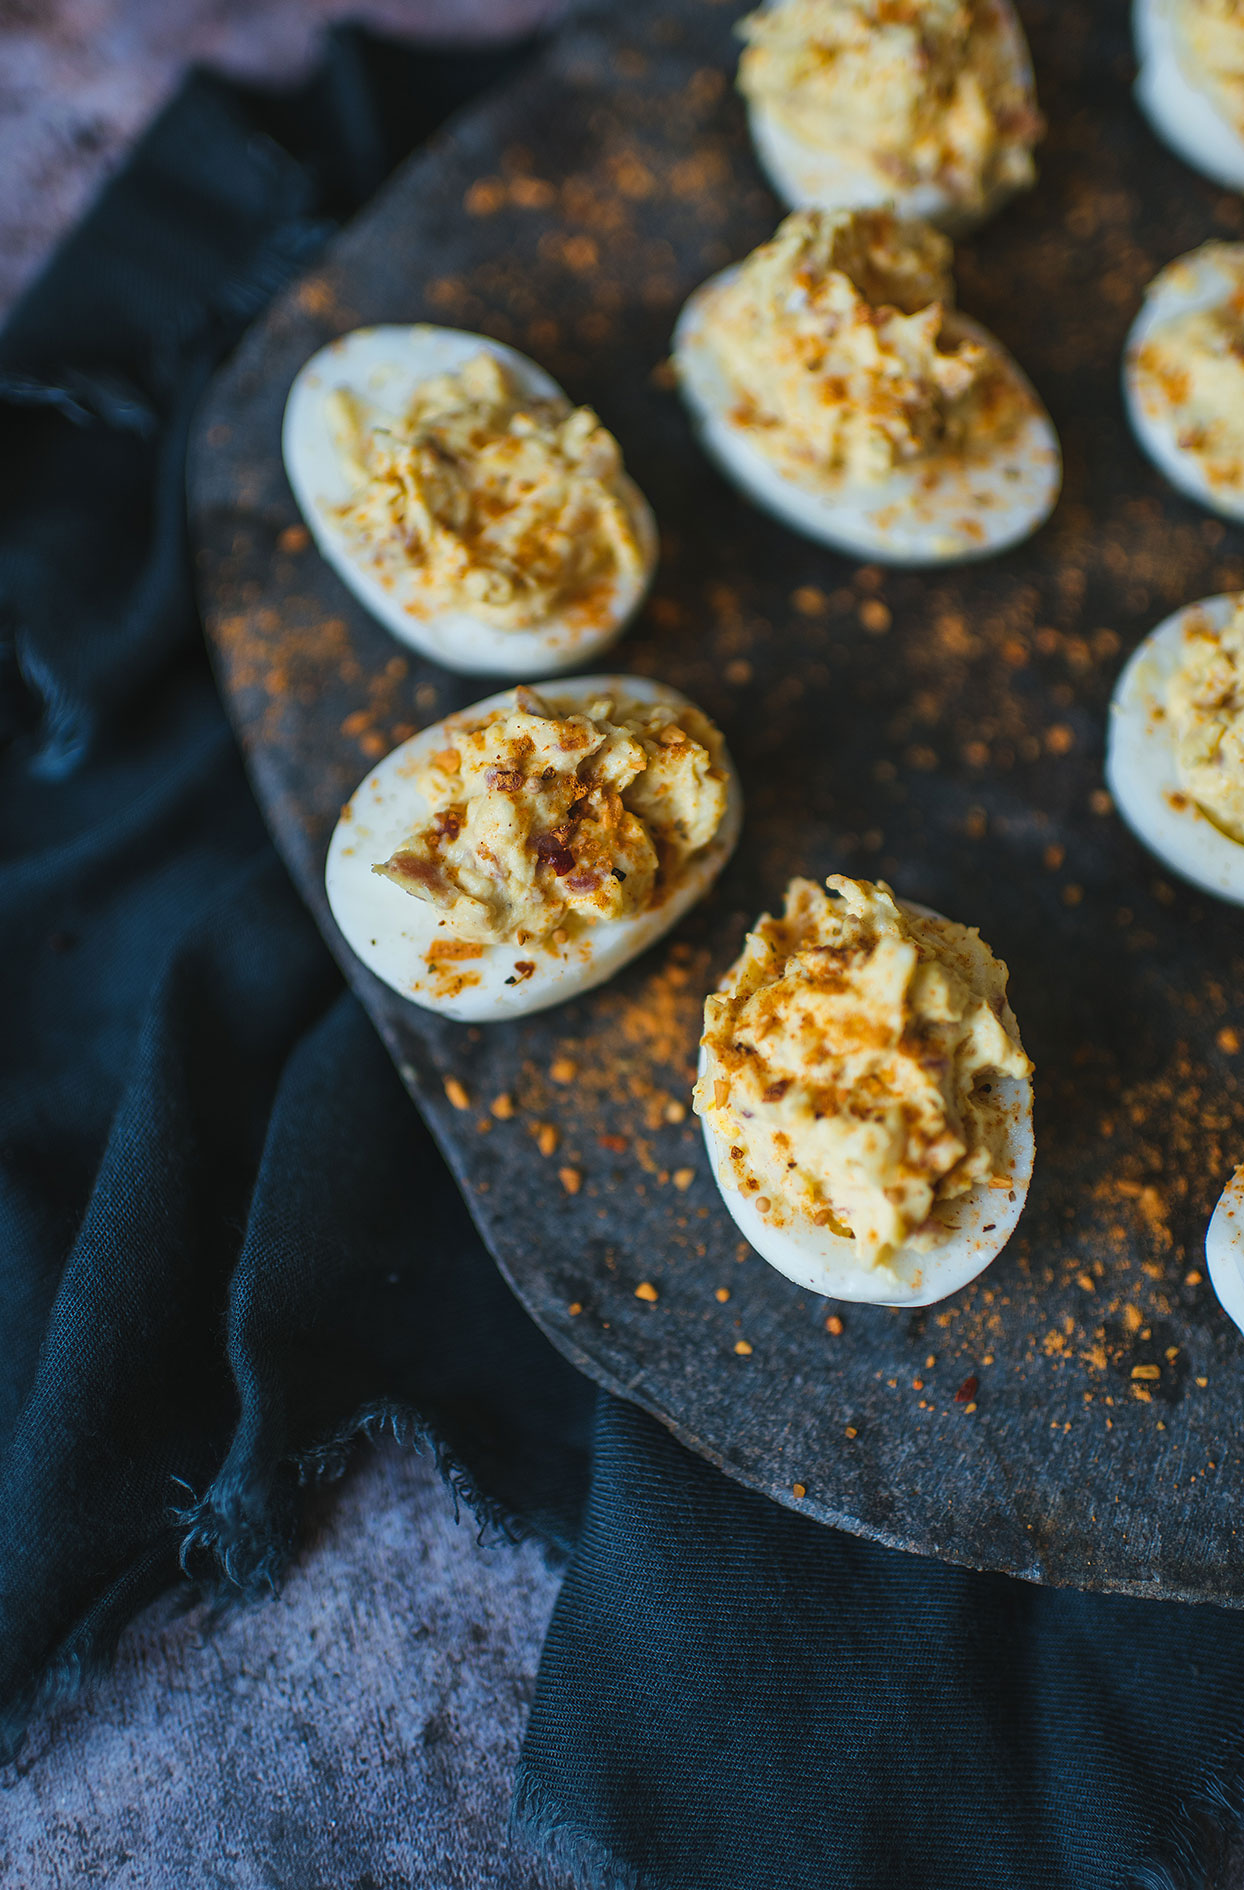 Smoked cheese and bacon deviled eggs